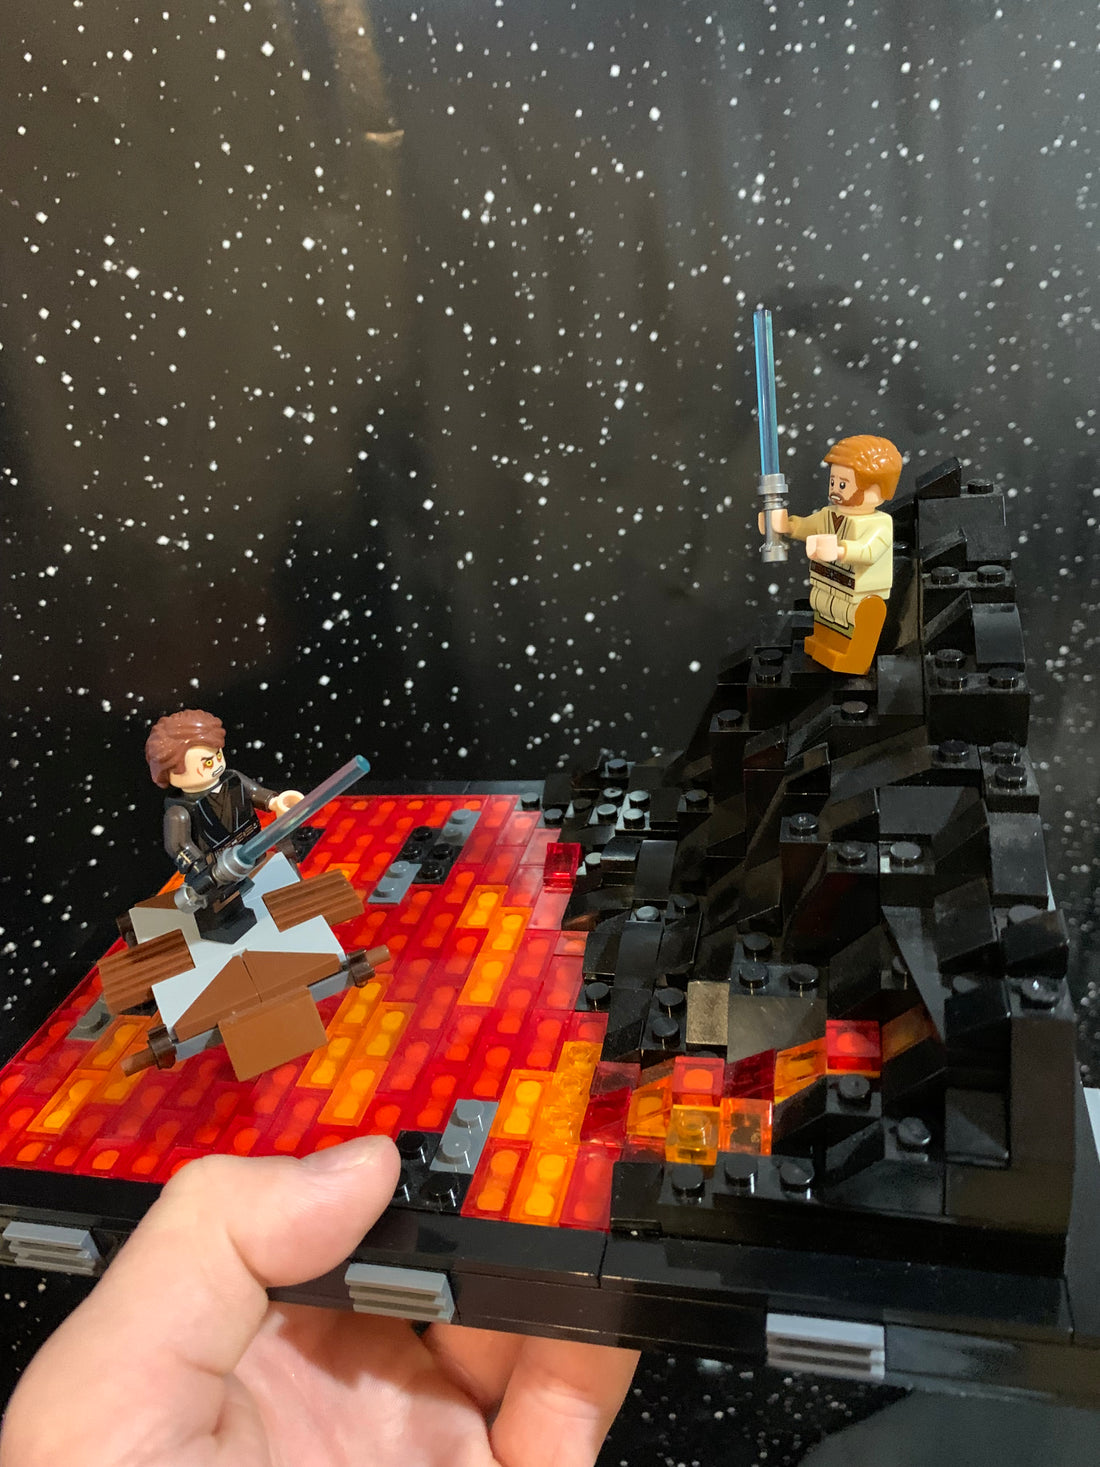 MOC-107226: Battle of the Heroes -by Breaaad